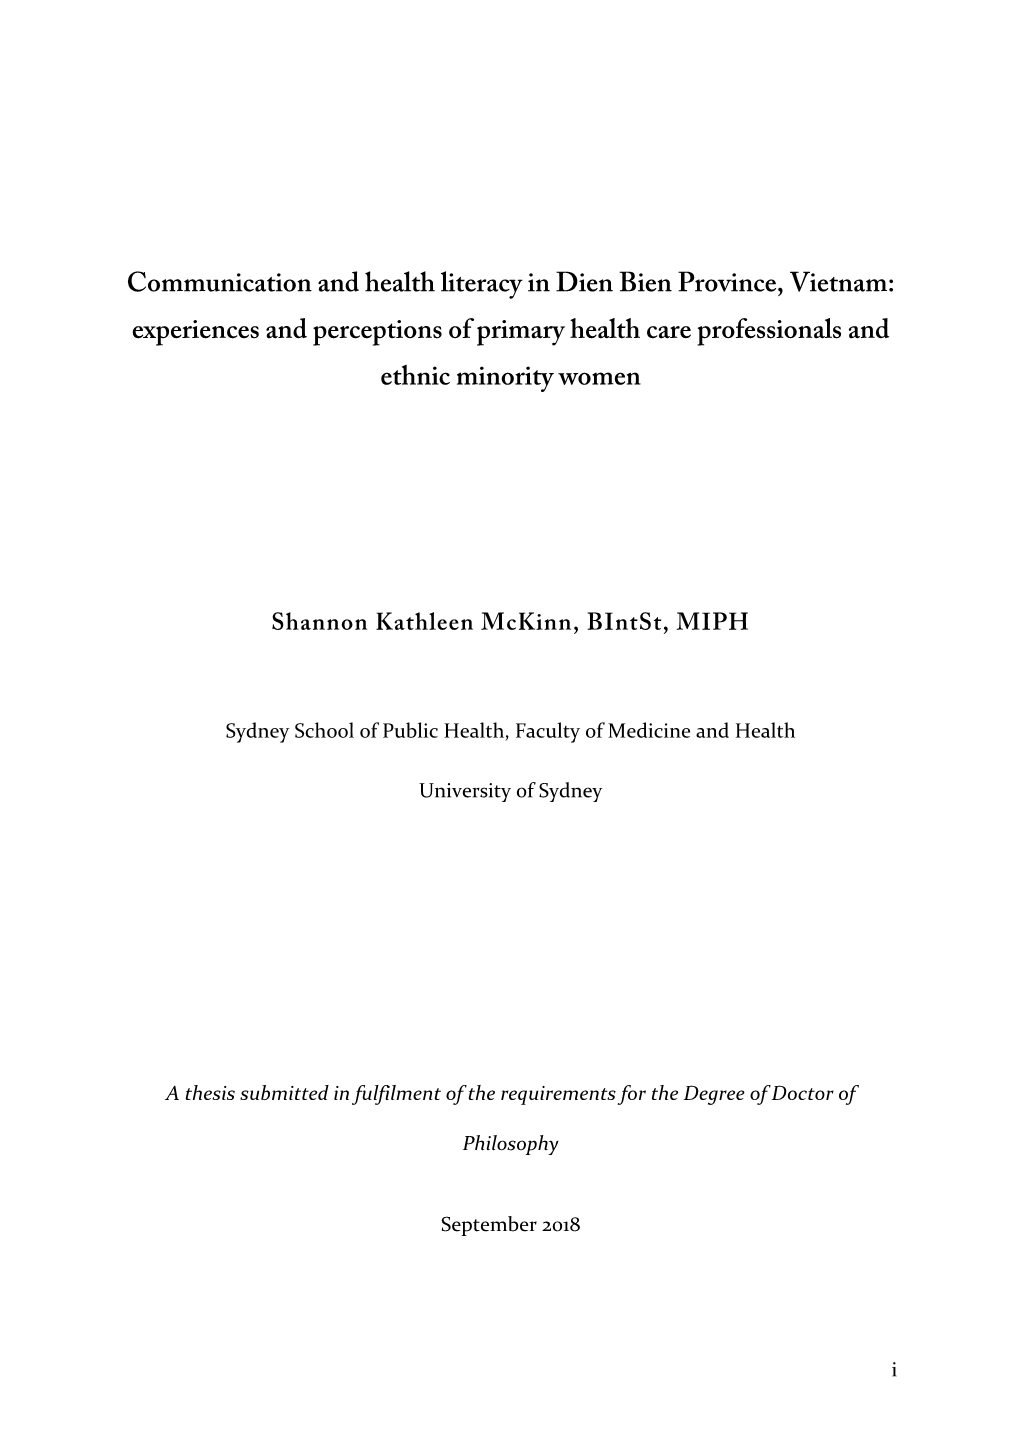 Communication and Health Literacy in Dien Bien Province, Vietnam: Experiences and Perceptions of Primary Health Care Professionals and Ethnic Minority Women